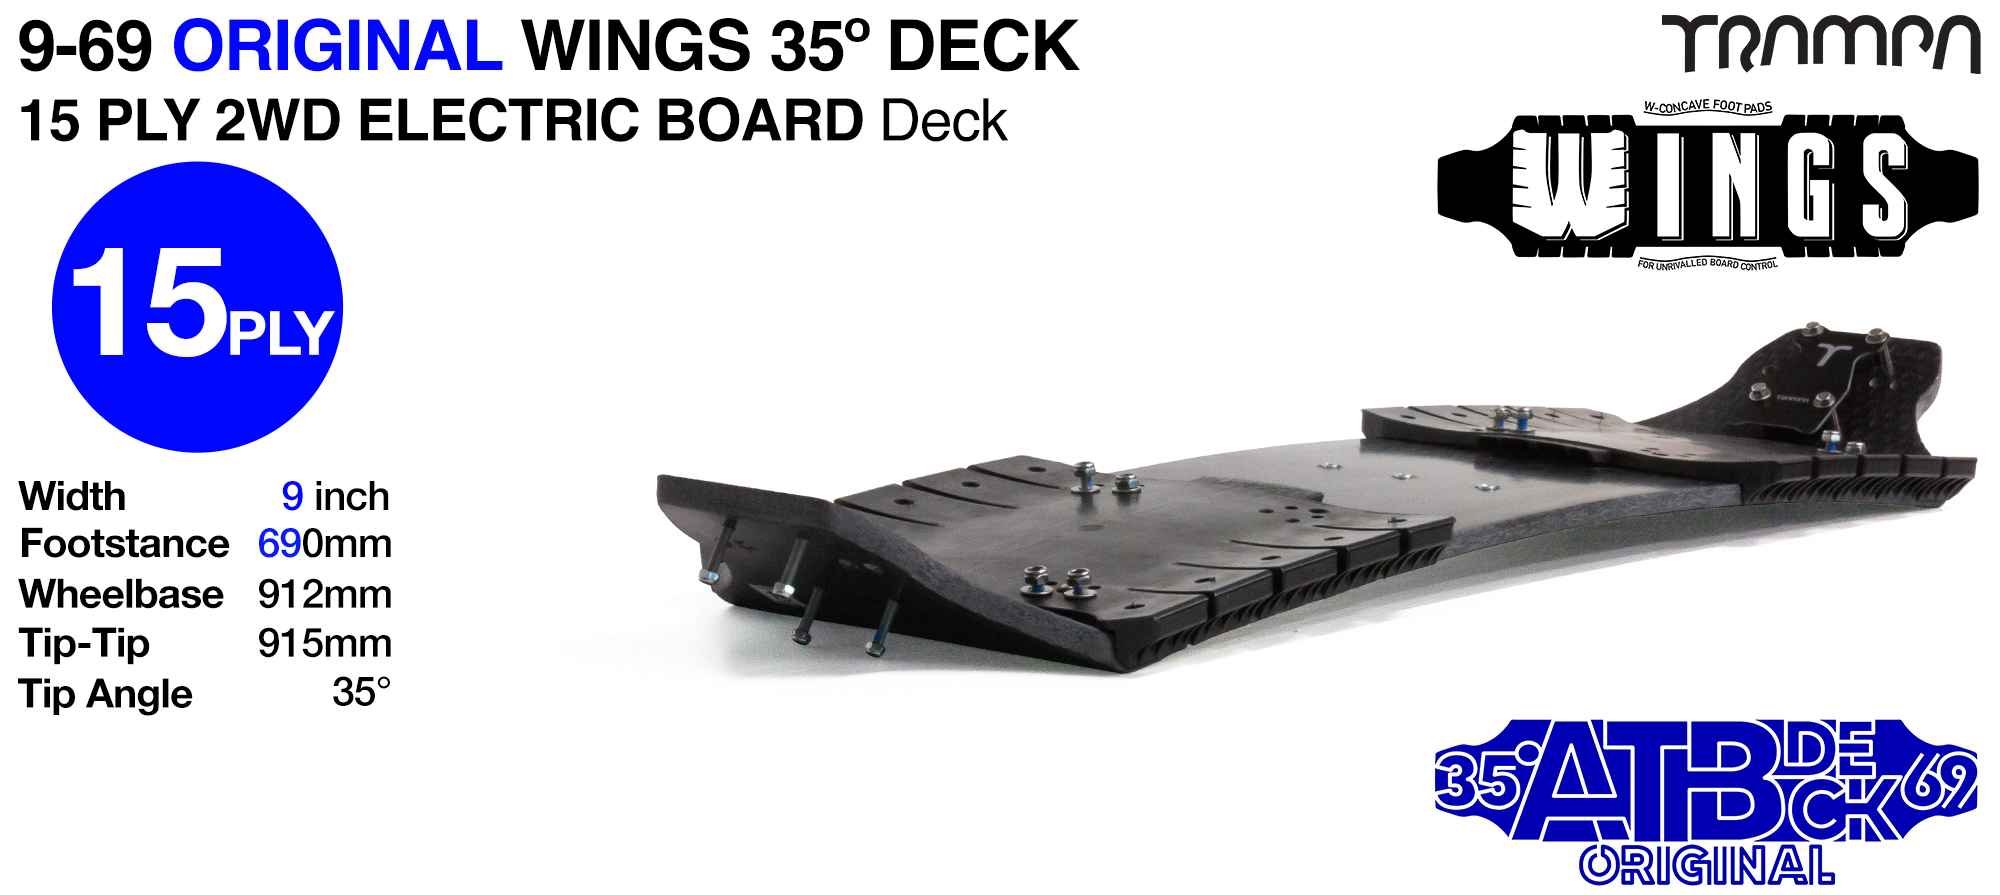 TRAMPA 35° 9/69 2WD Electric Mountainboard Deck with WINGS - WINGS give safe cable routing, adds W Shaped concave & the increase the width of the deck from 9 to 10 Inches - 15ply